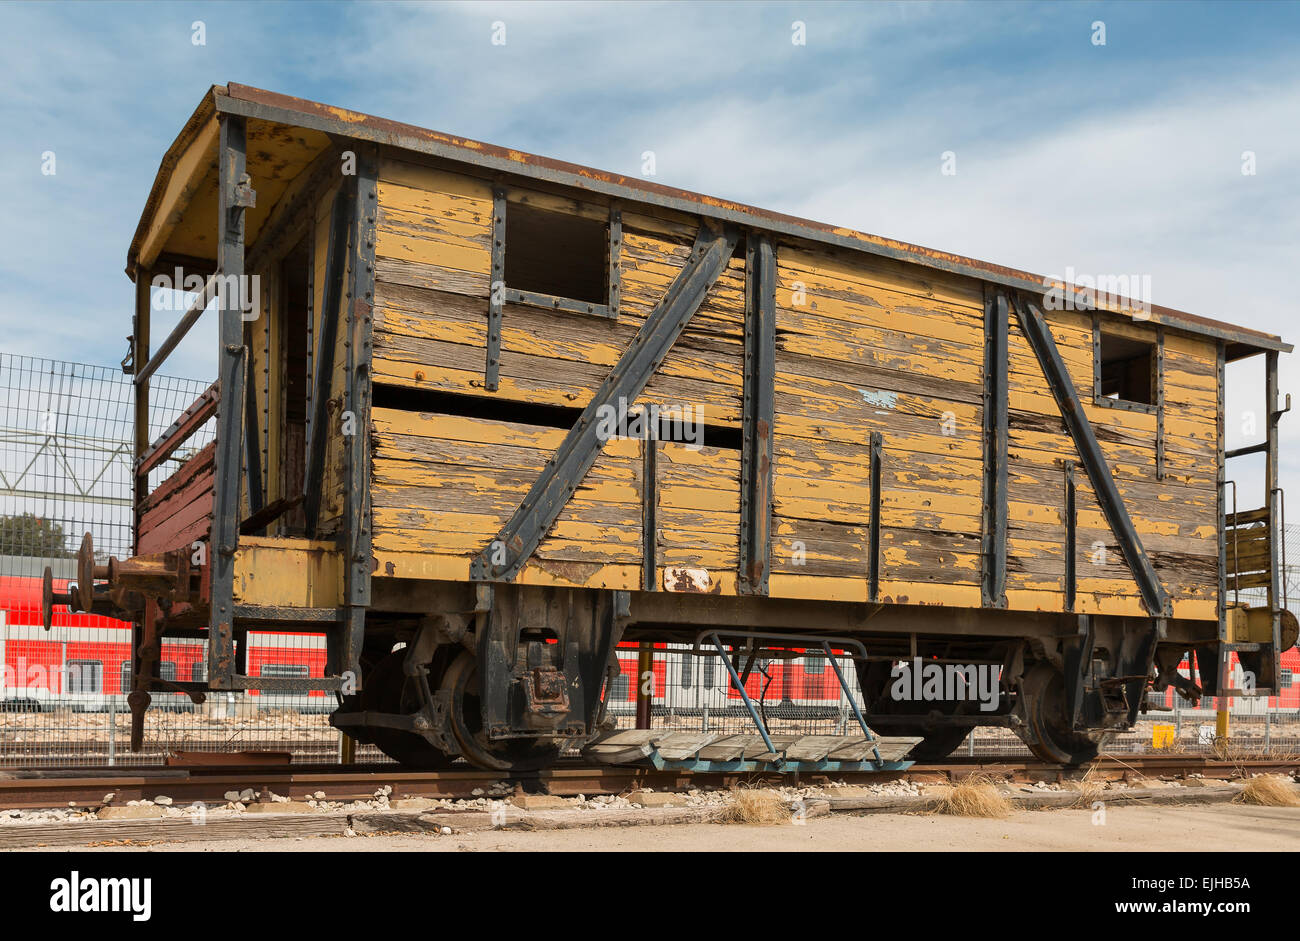 old railway cars stand on the track Stock Photo